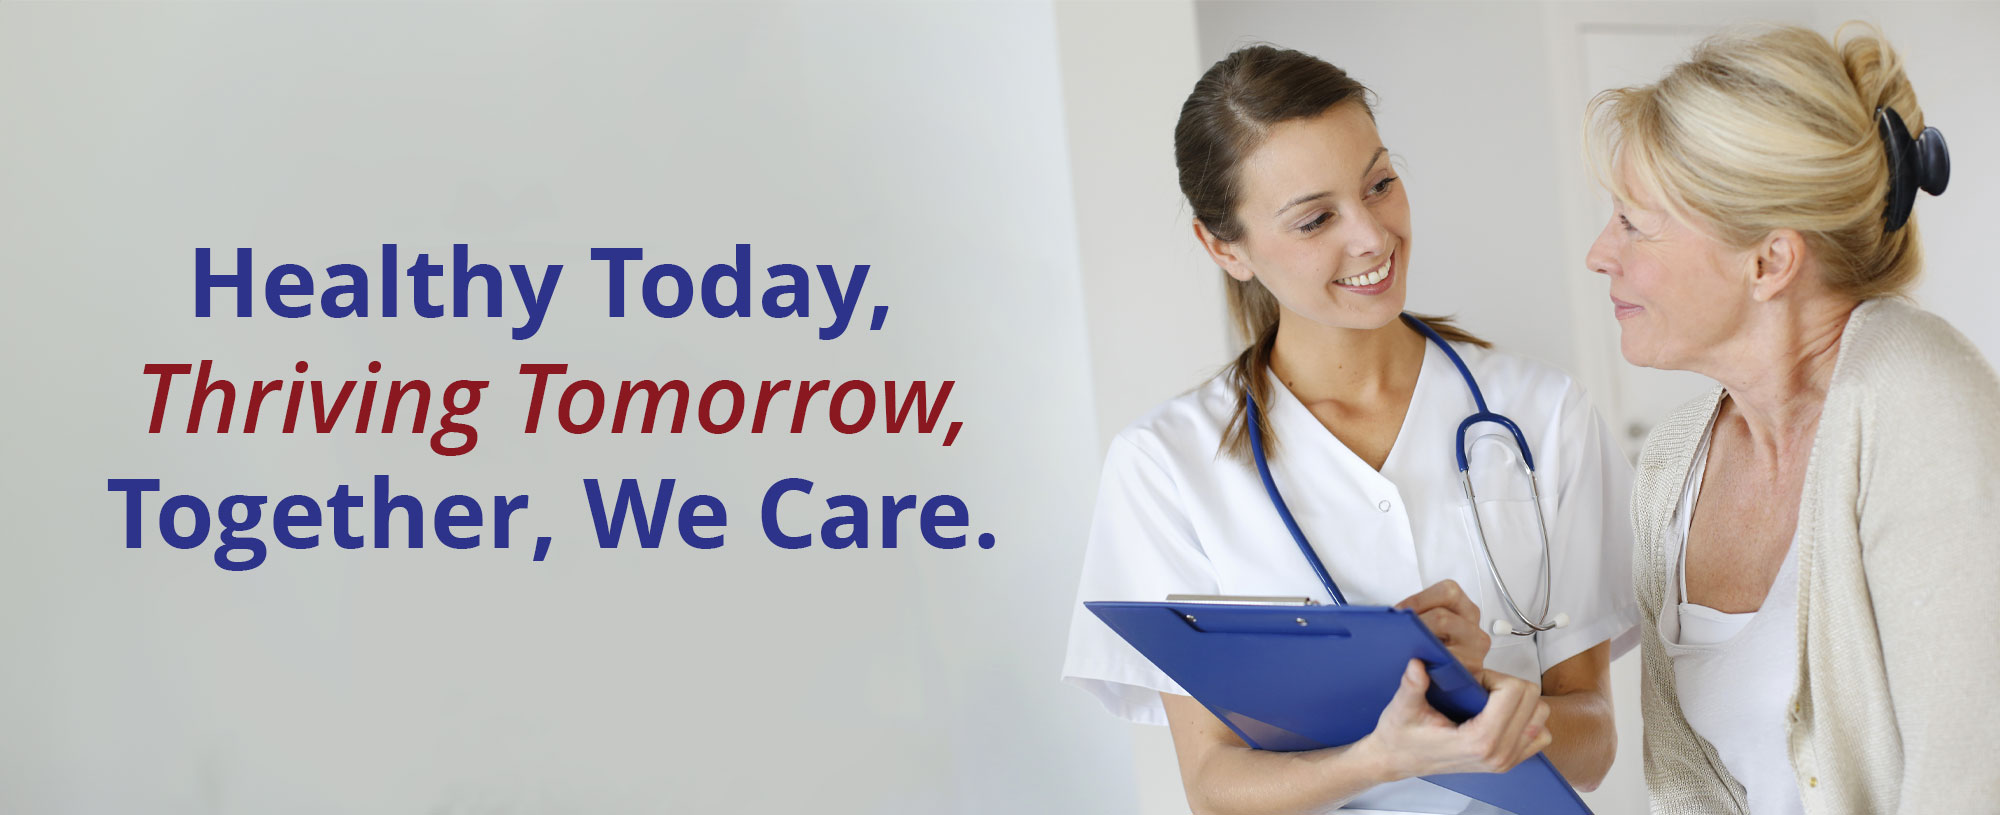 Healthy Today, Thriving Tomorrow, Together, We Care.